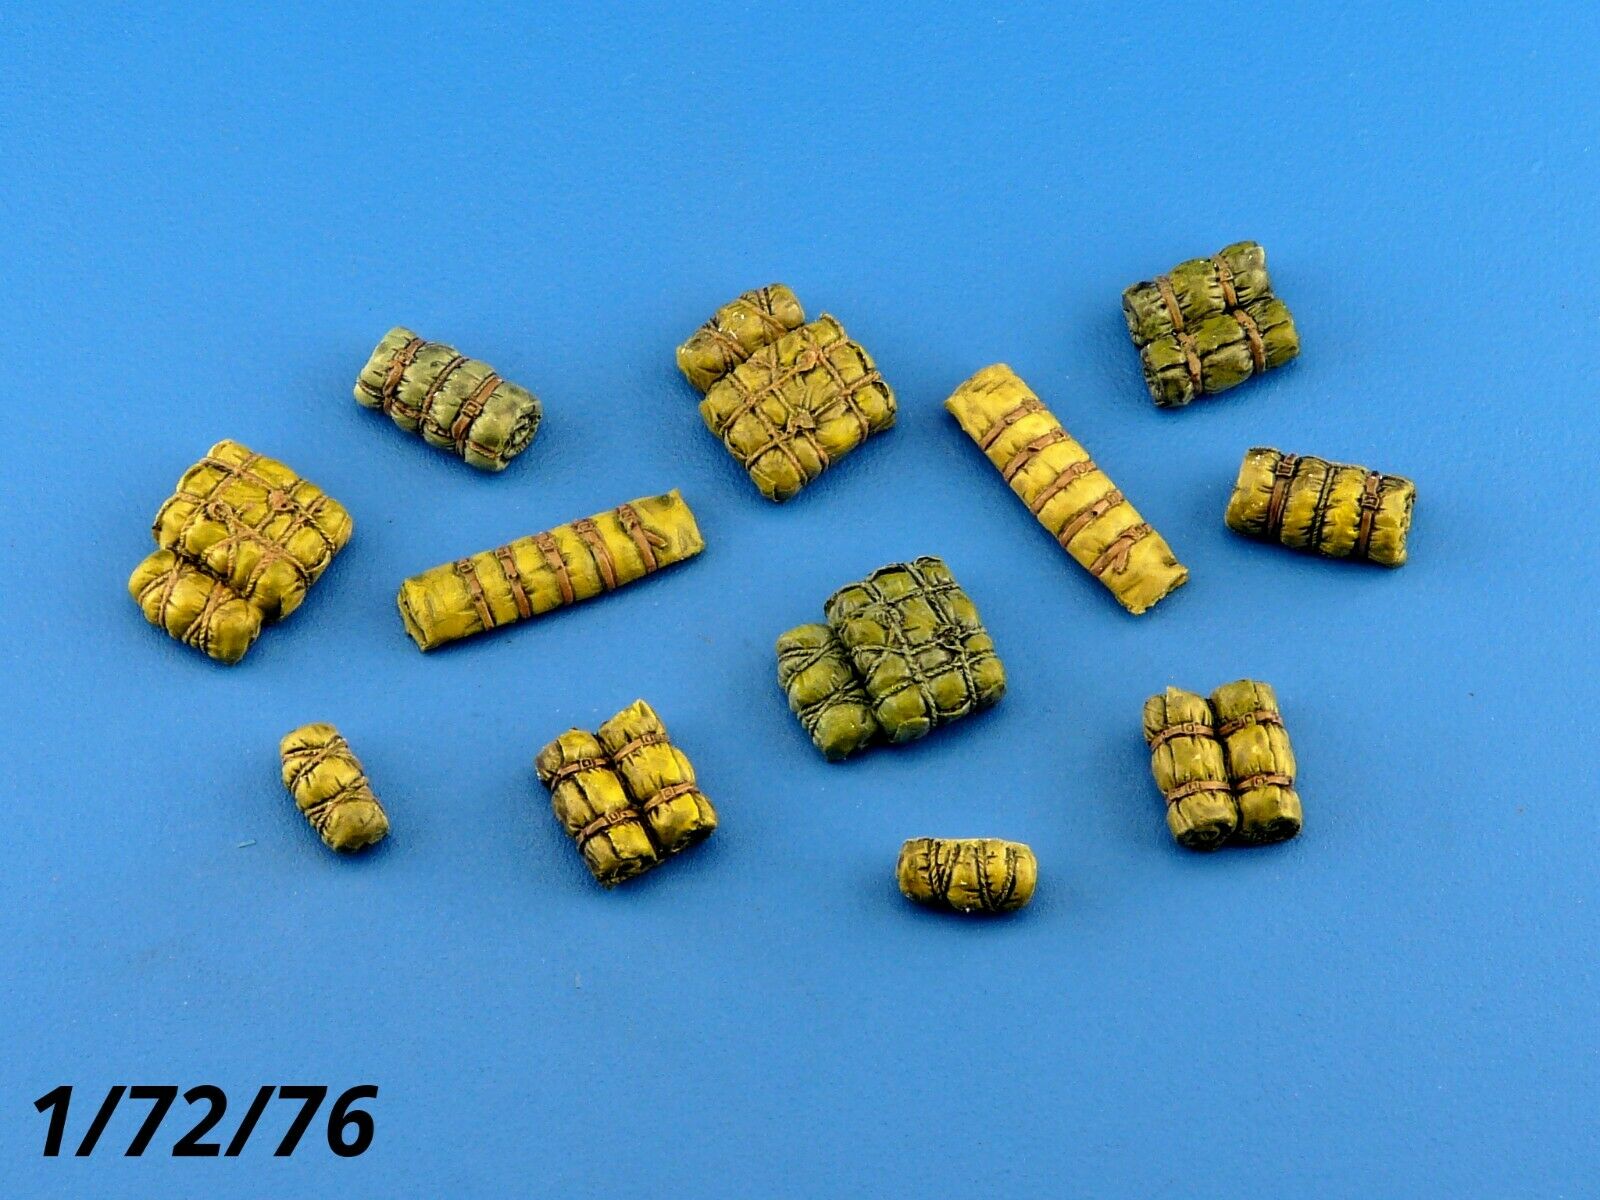 1/72 Cargo Military Stowage Tents Rolls - Scale Modelling Kit Accessories 6 - redoguk